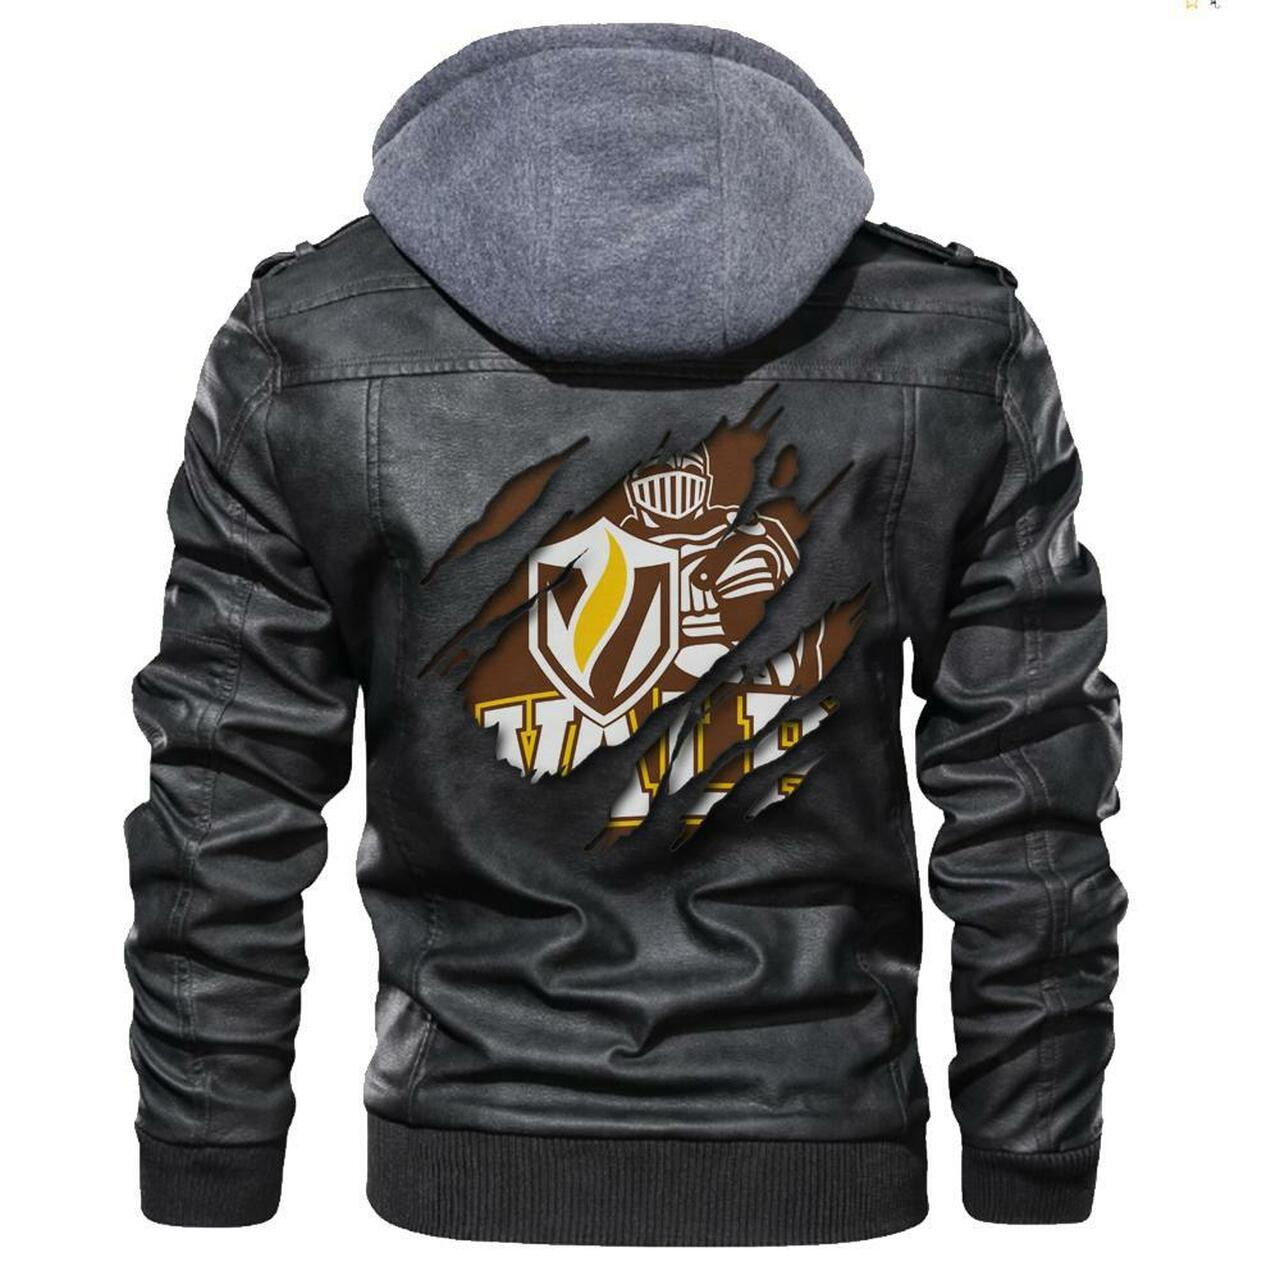 Top leather jacket can keep you warm on cooler days 203